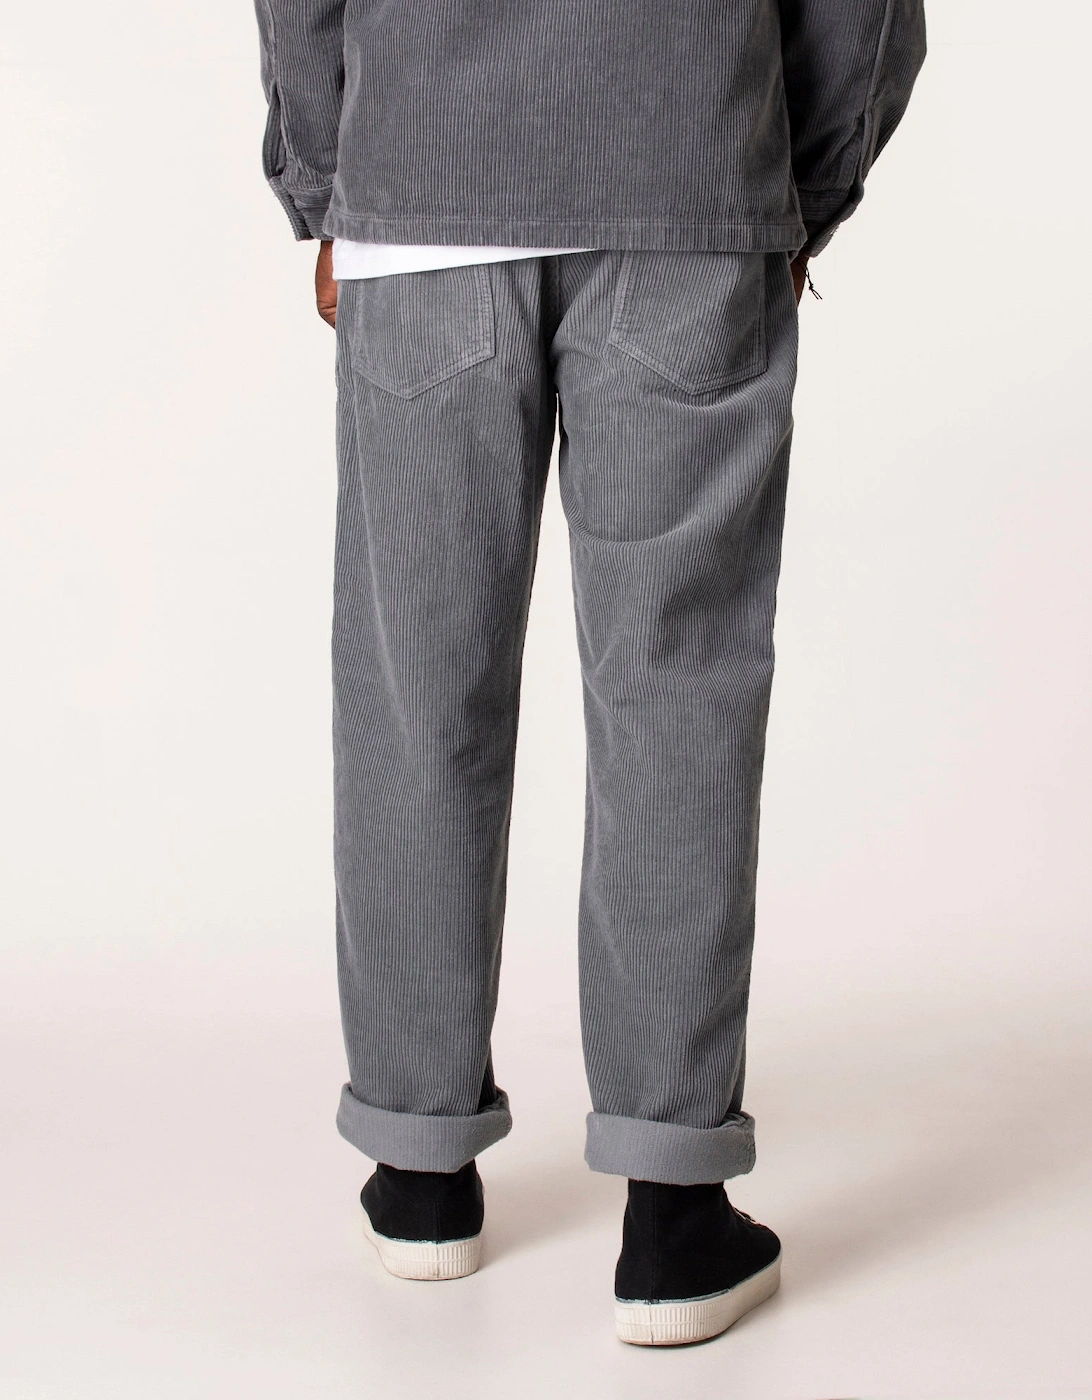 Relaxed Fit Corduroy Fat Pants